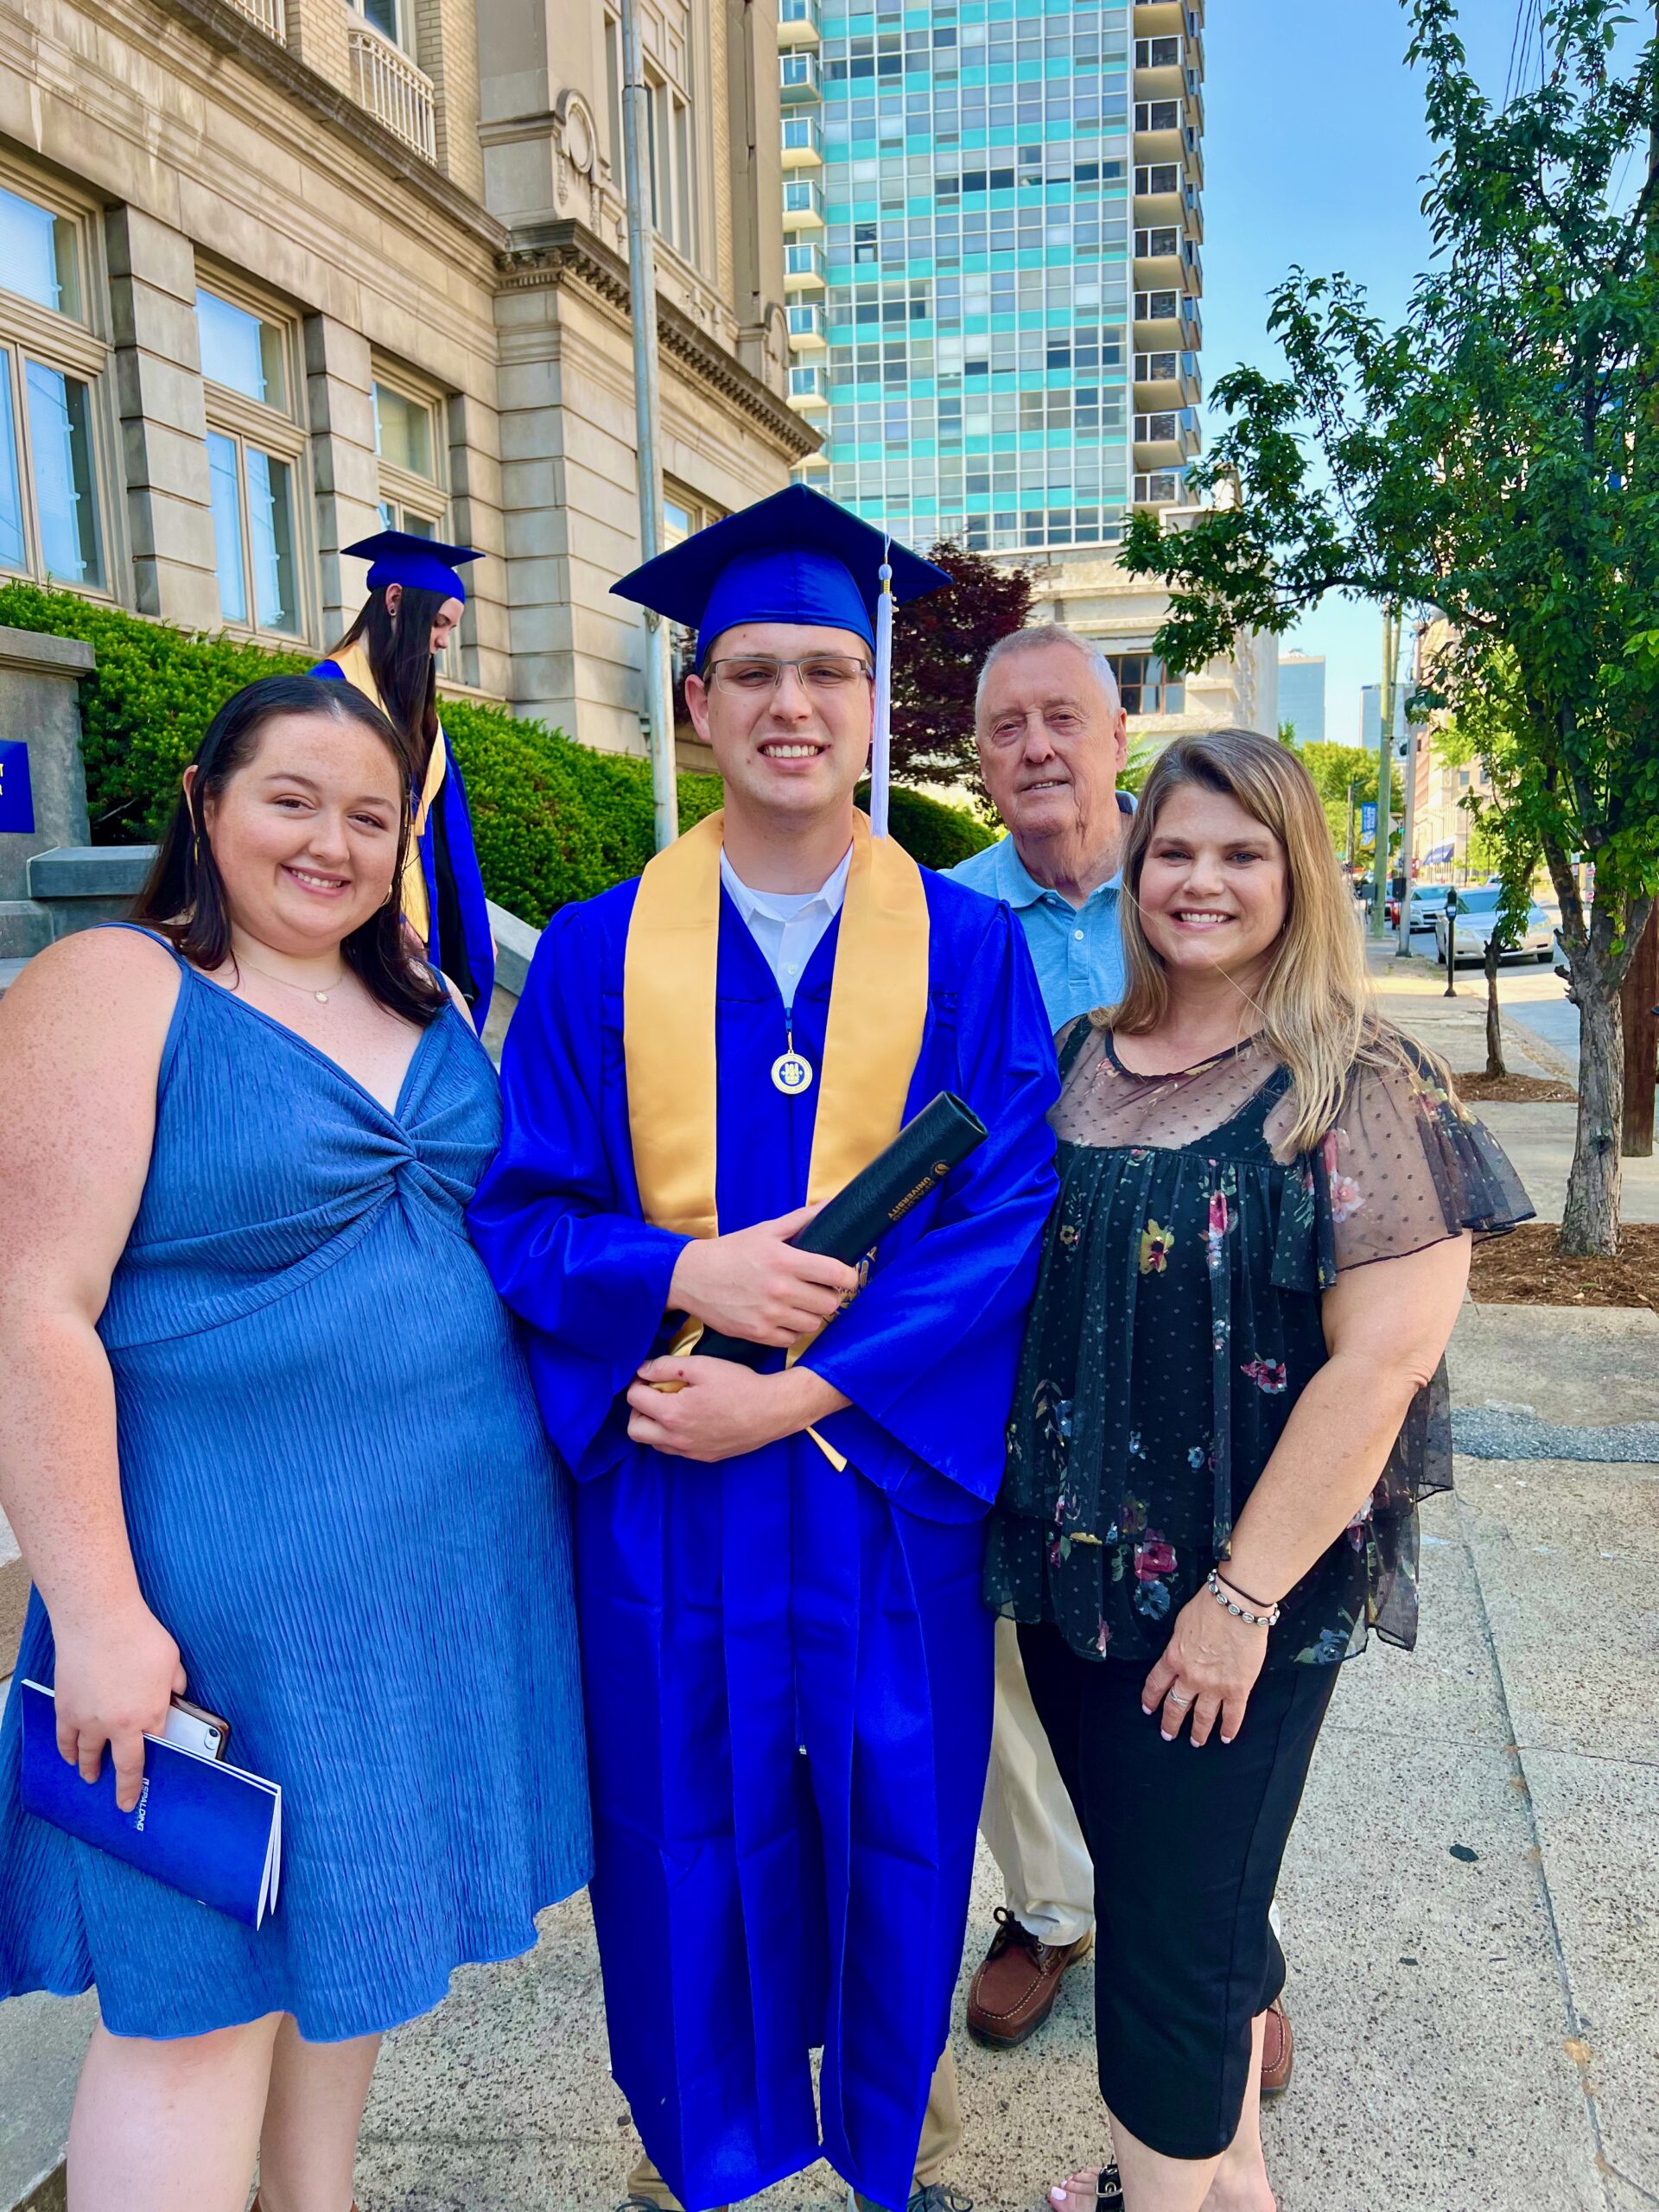 Spalding bachelor's graduate posing with family member for photo outside